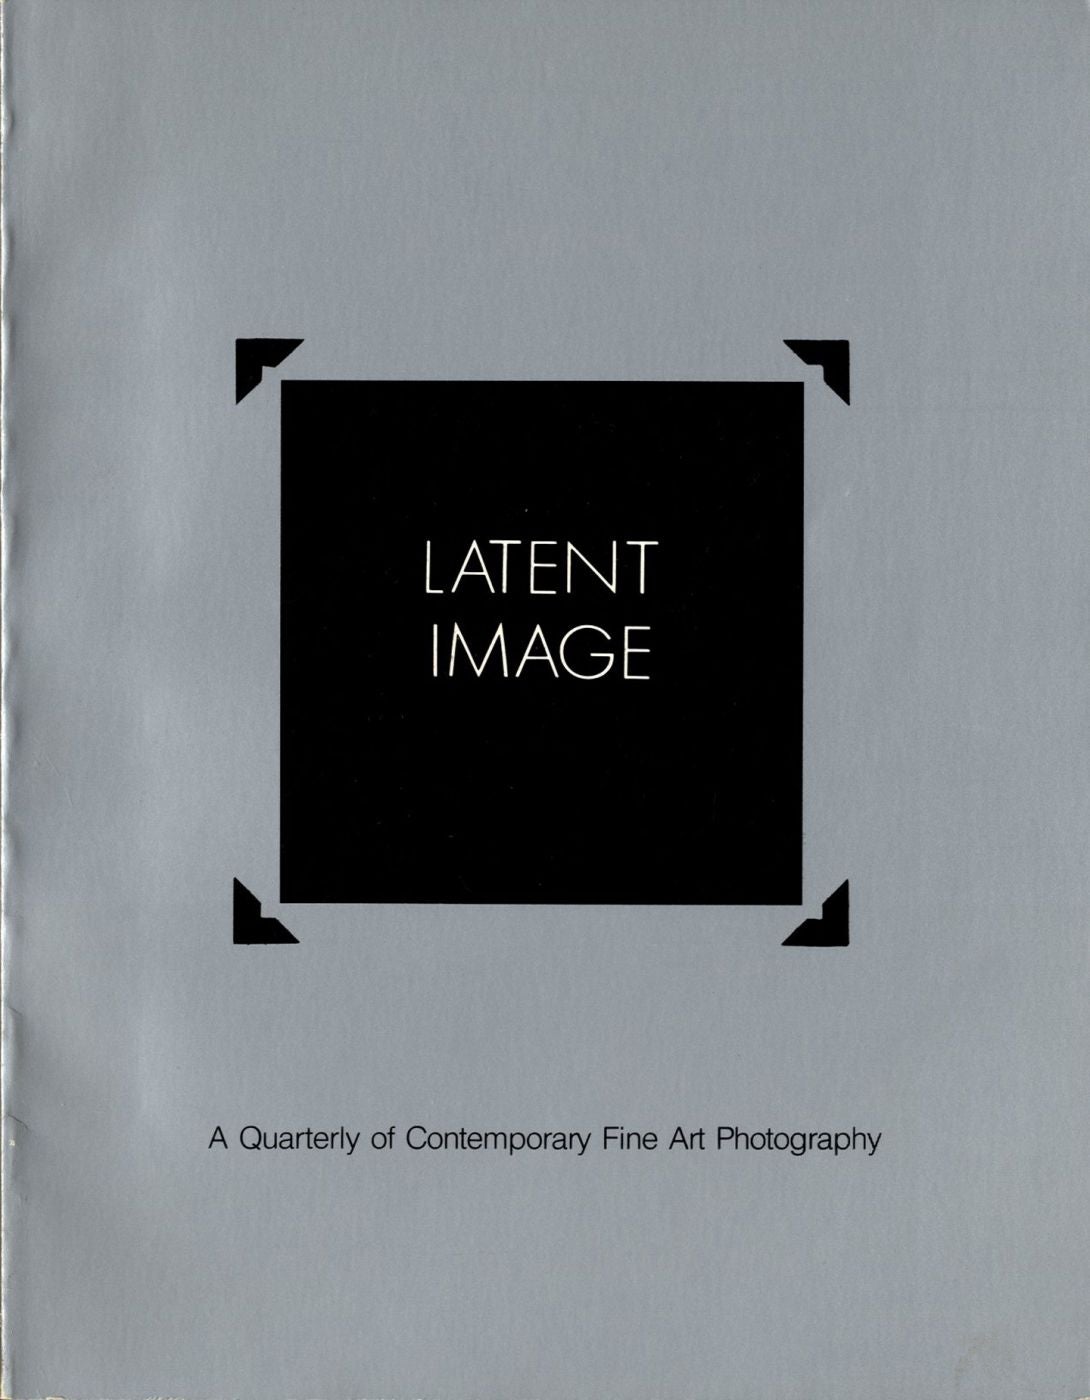 Latent Image: A Quarterly of Contemporary Fine Art Photography (Volume 1. No. 1)